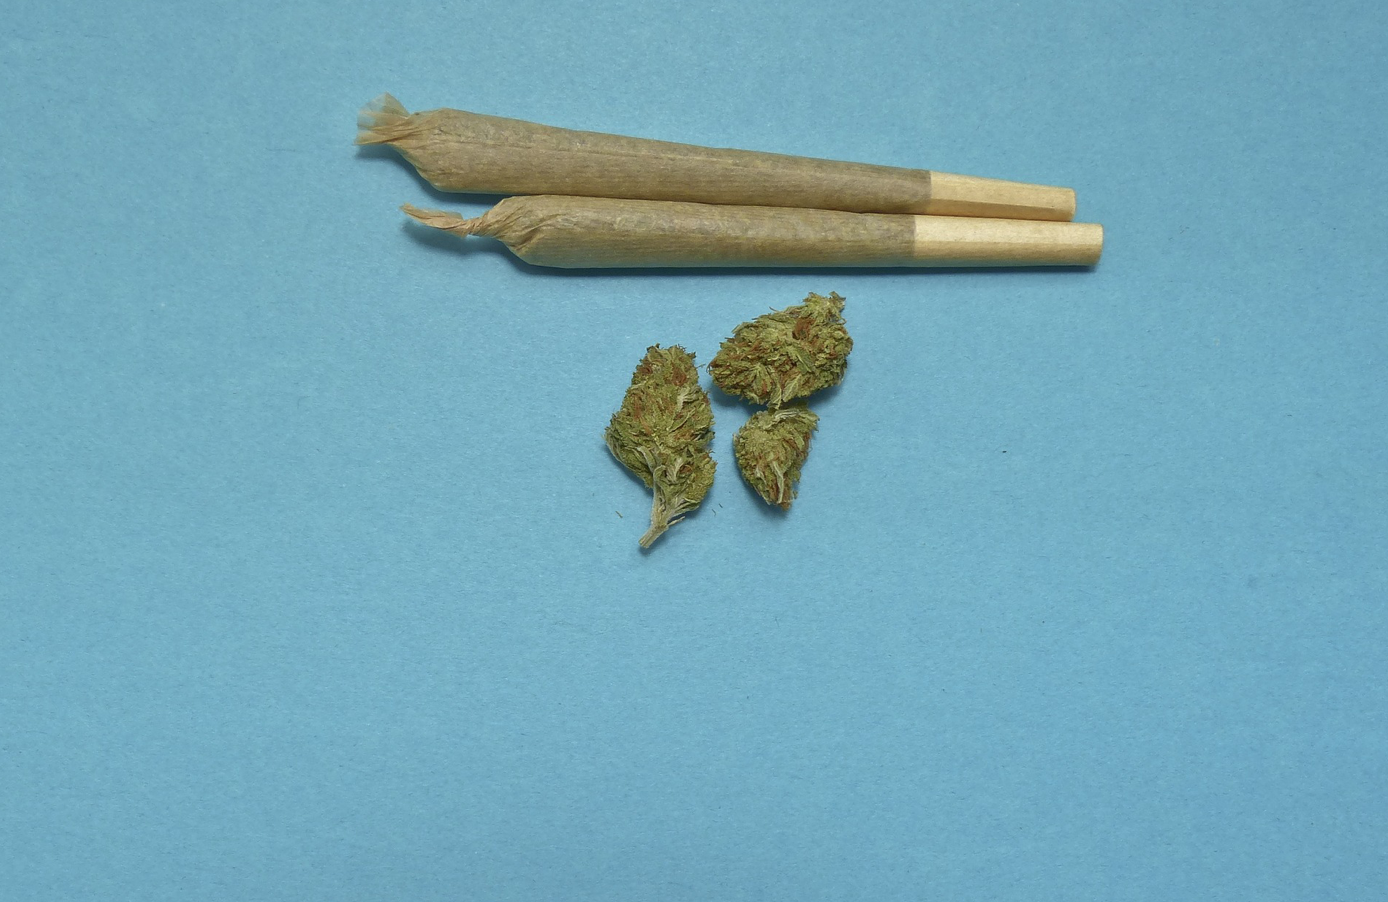 Two pre-rolls and three nugs of weed; image by TechPhotoGal, via Pixabay.com.